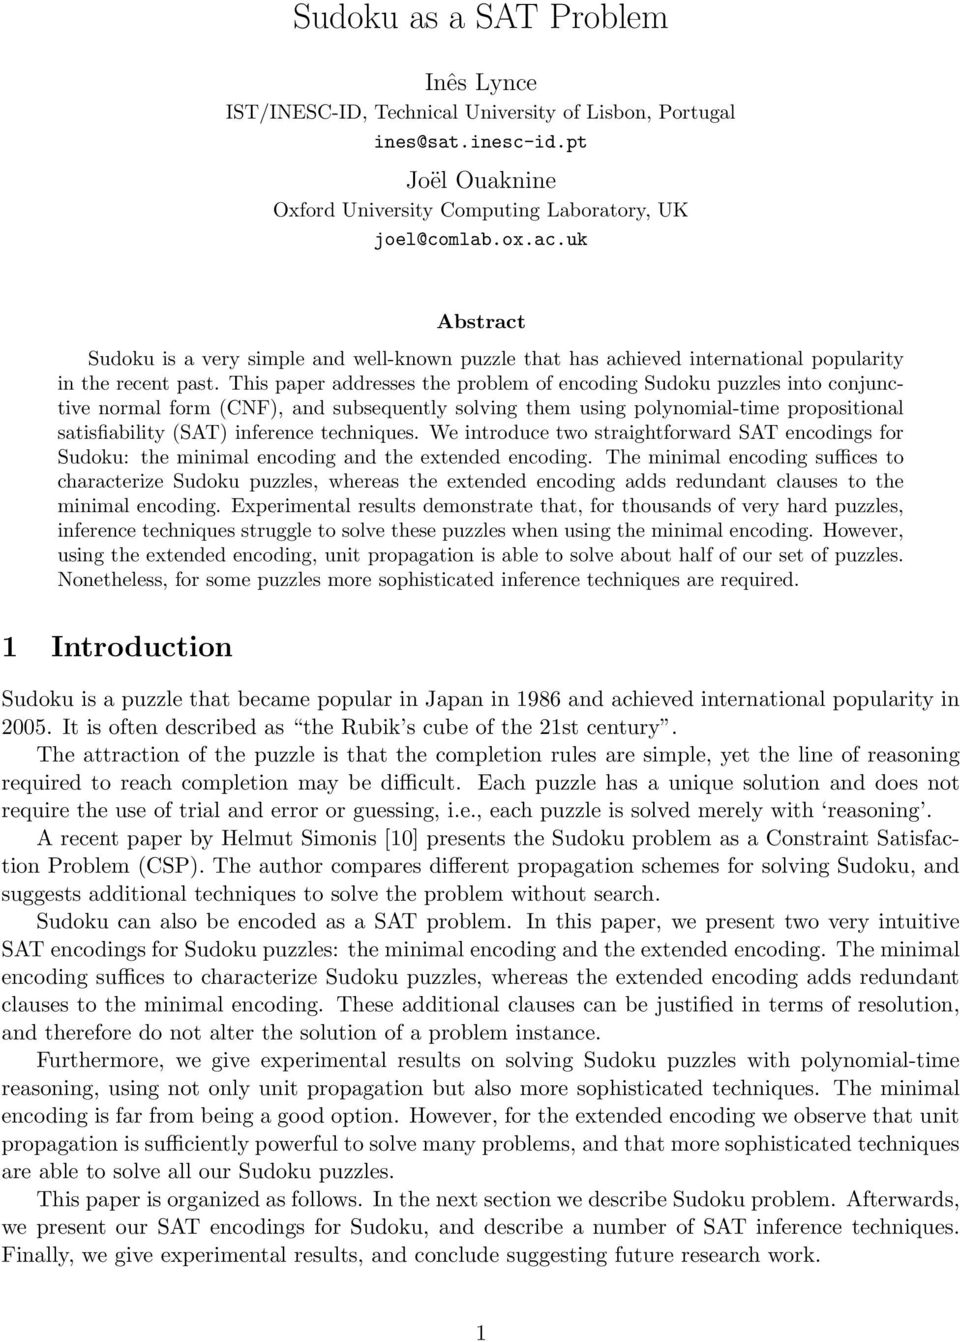 This paper addresses the problem of encoding Sudoku puzzles into conjunctive normal form (CNF), and subsequently solving them using polynomial-time propositional satisfiability (SAT) inference